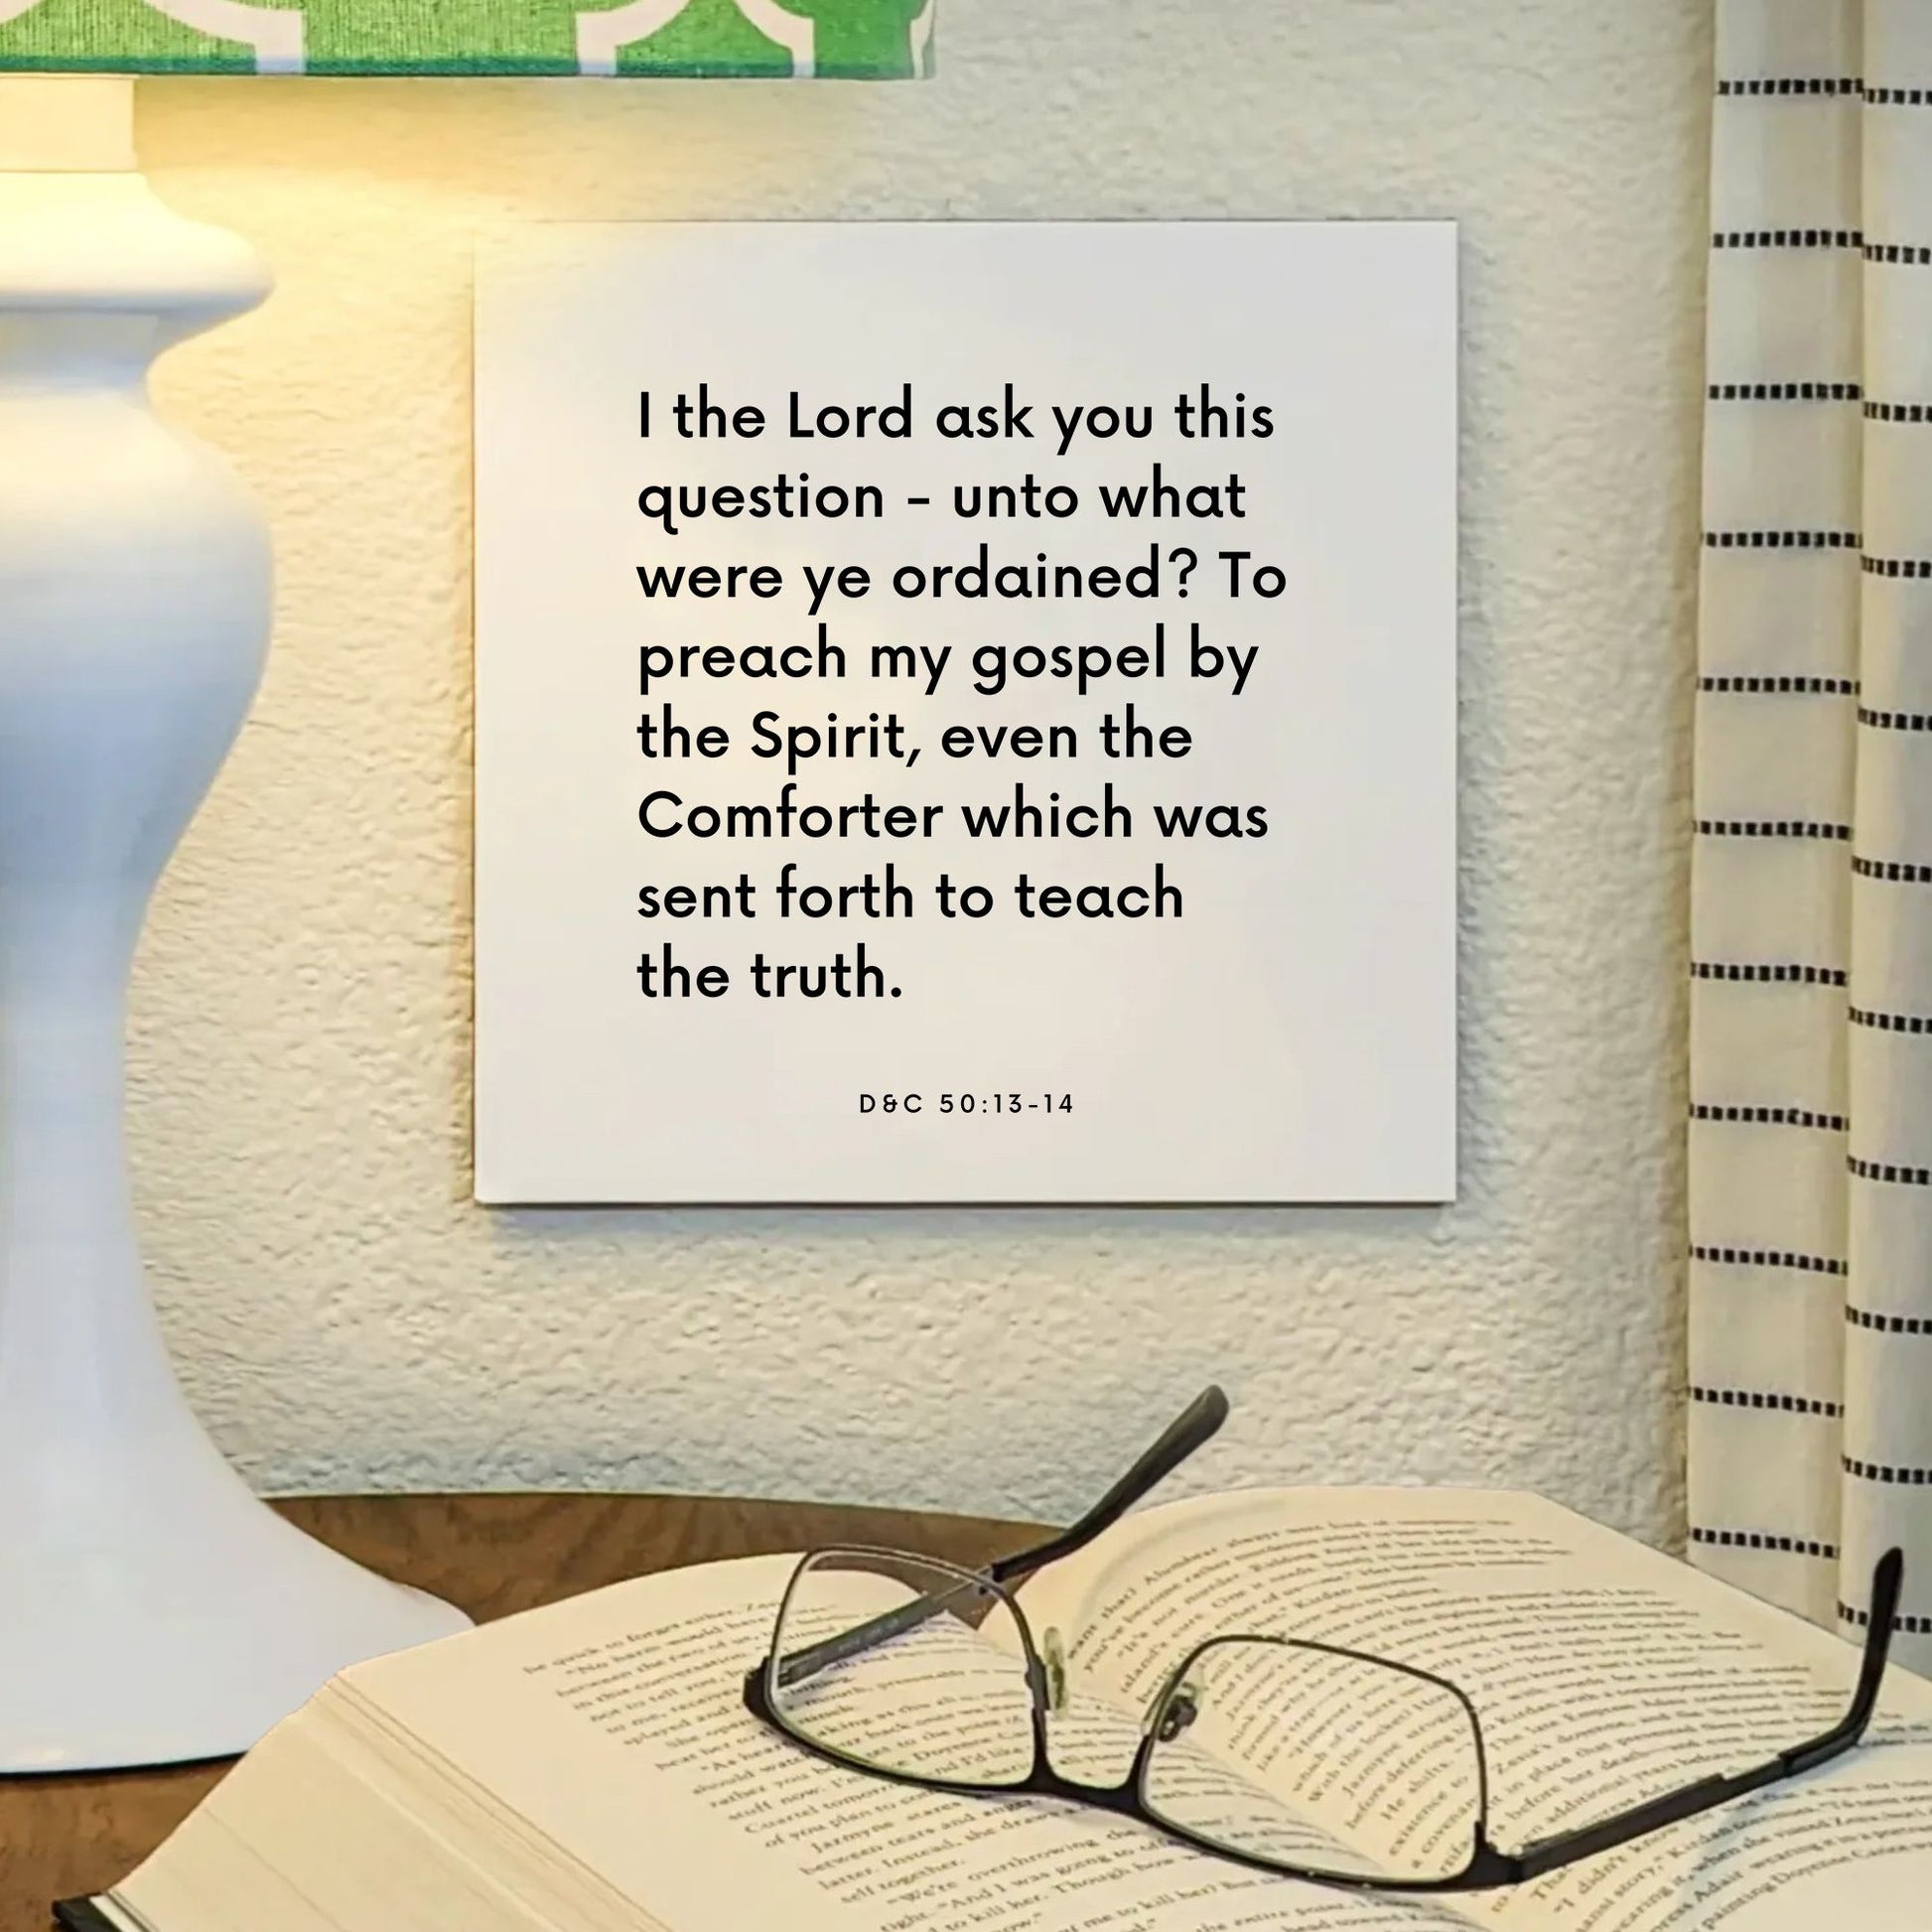 Lamp mouting of the scripture tile for D&C 50:13-14 - "I the Lord ask you this question - unto what were ye ordained?"